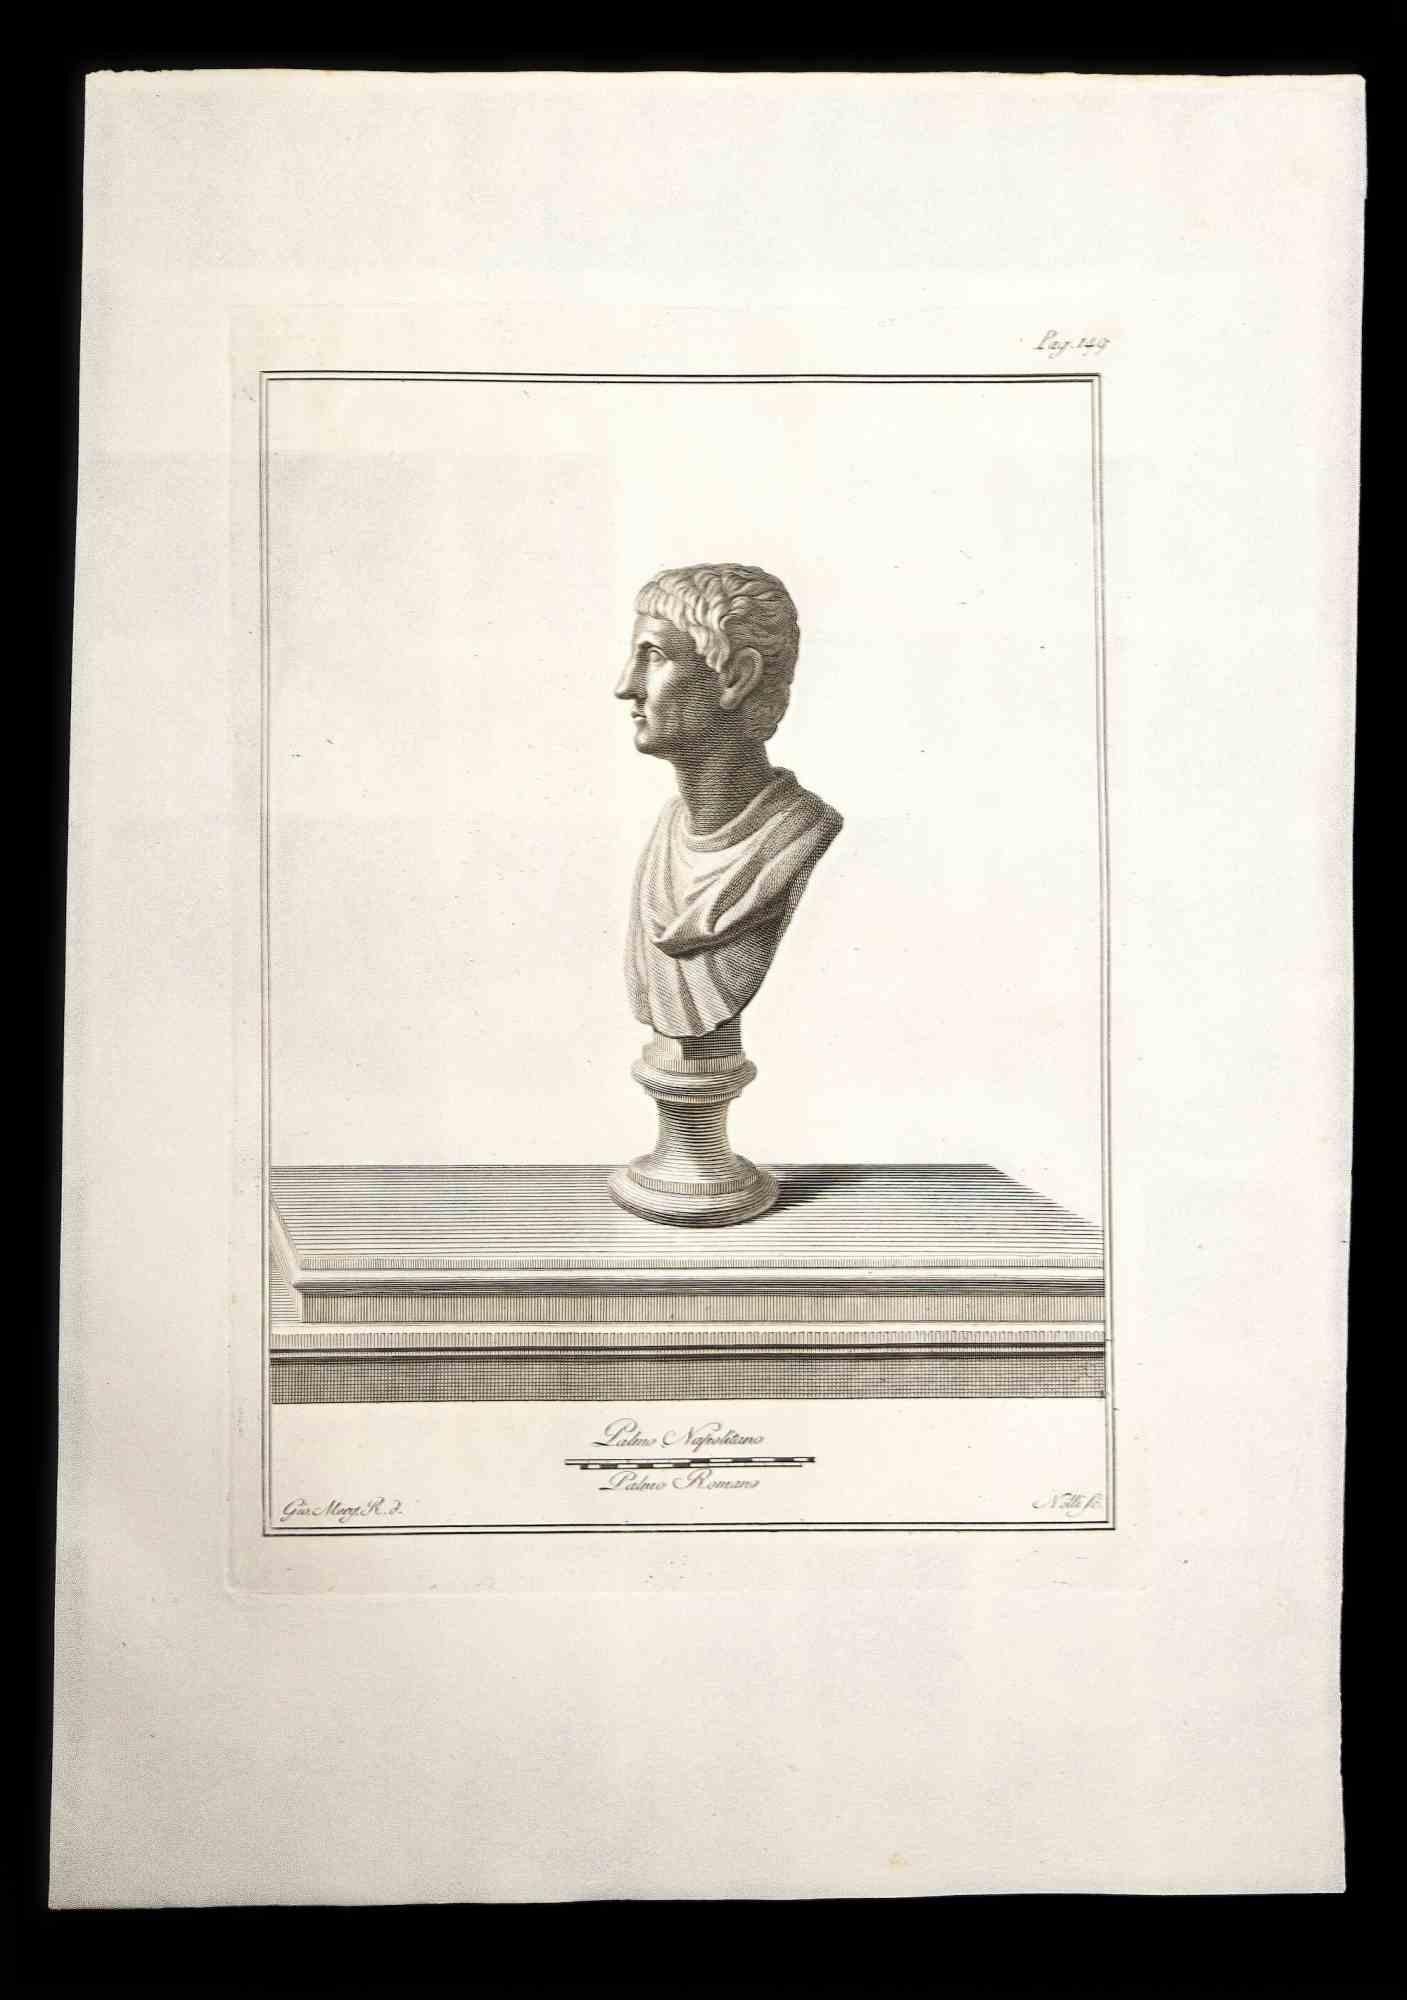 Filippo Morghen Figurative Print - Ancient Roman Bust - Original Etching by F. Morghen - 18th century